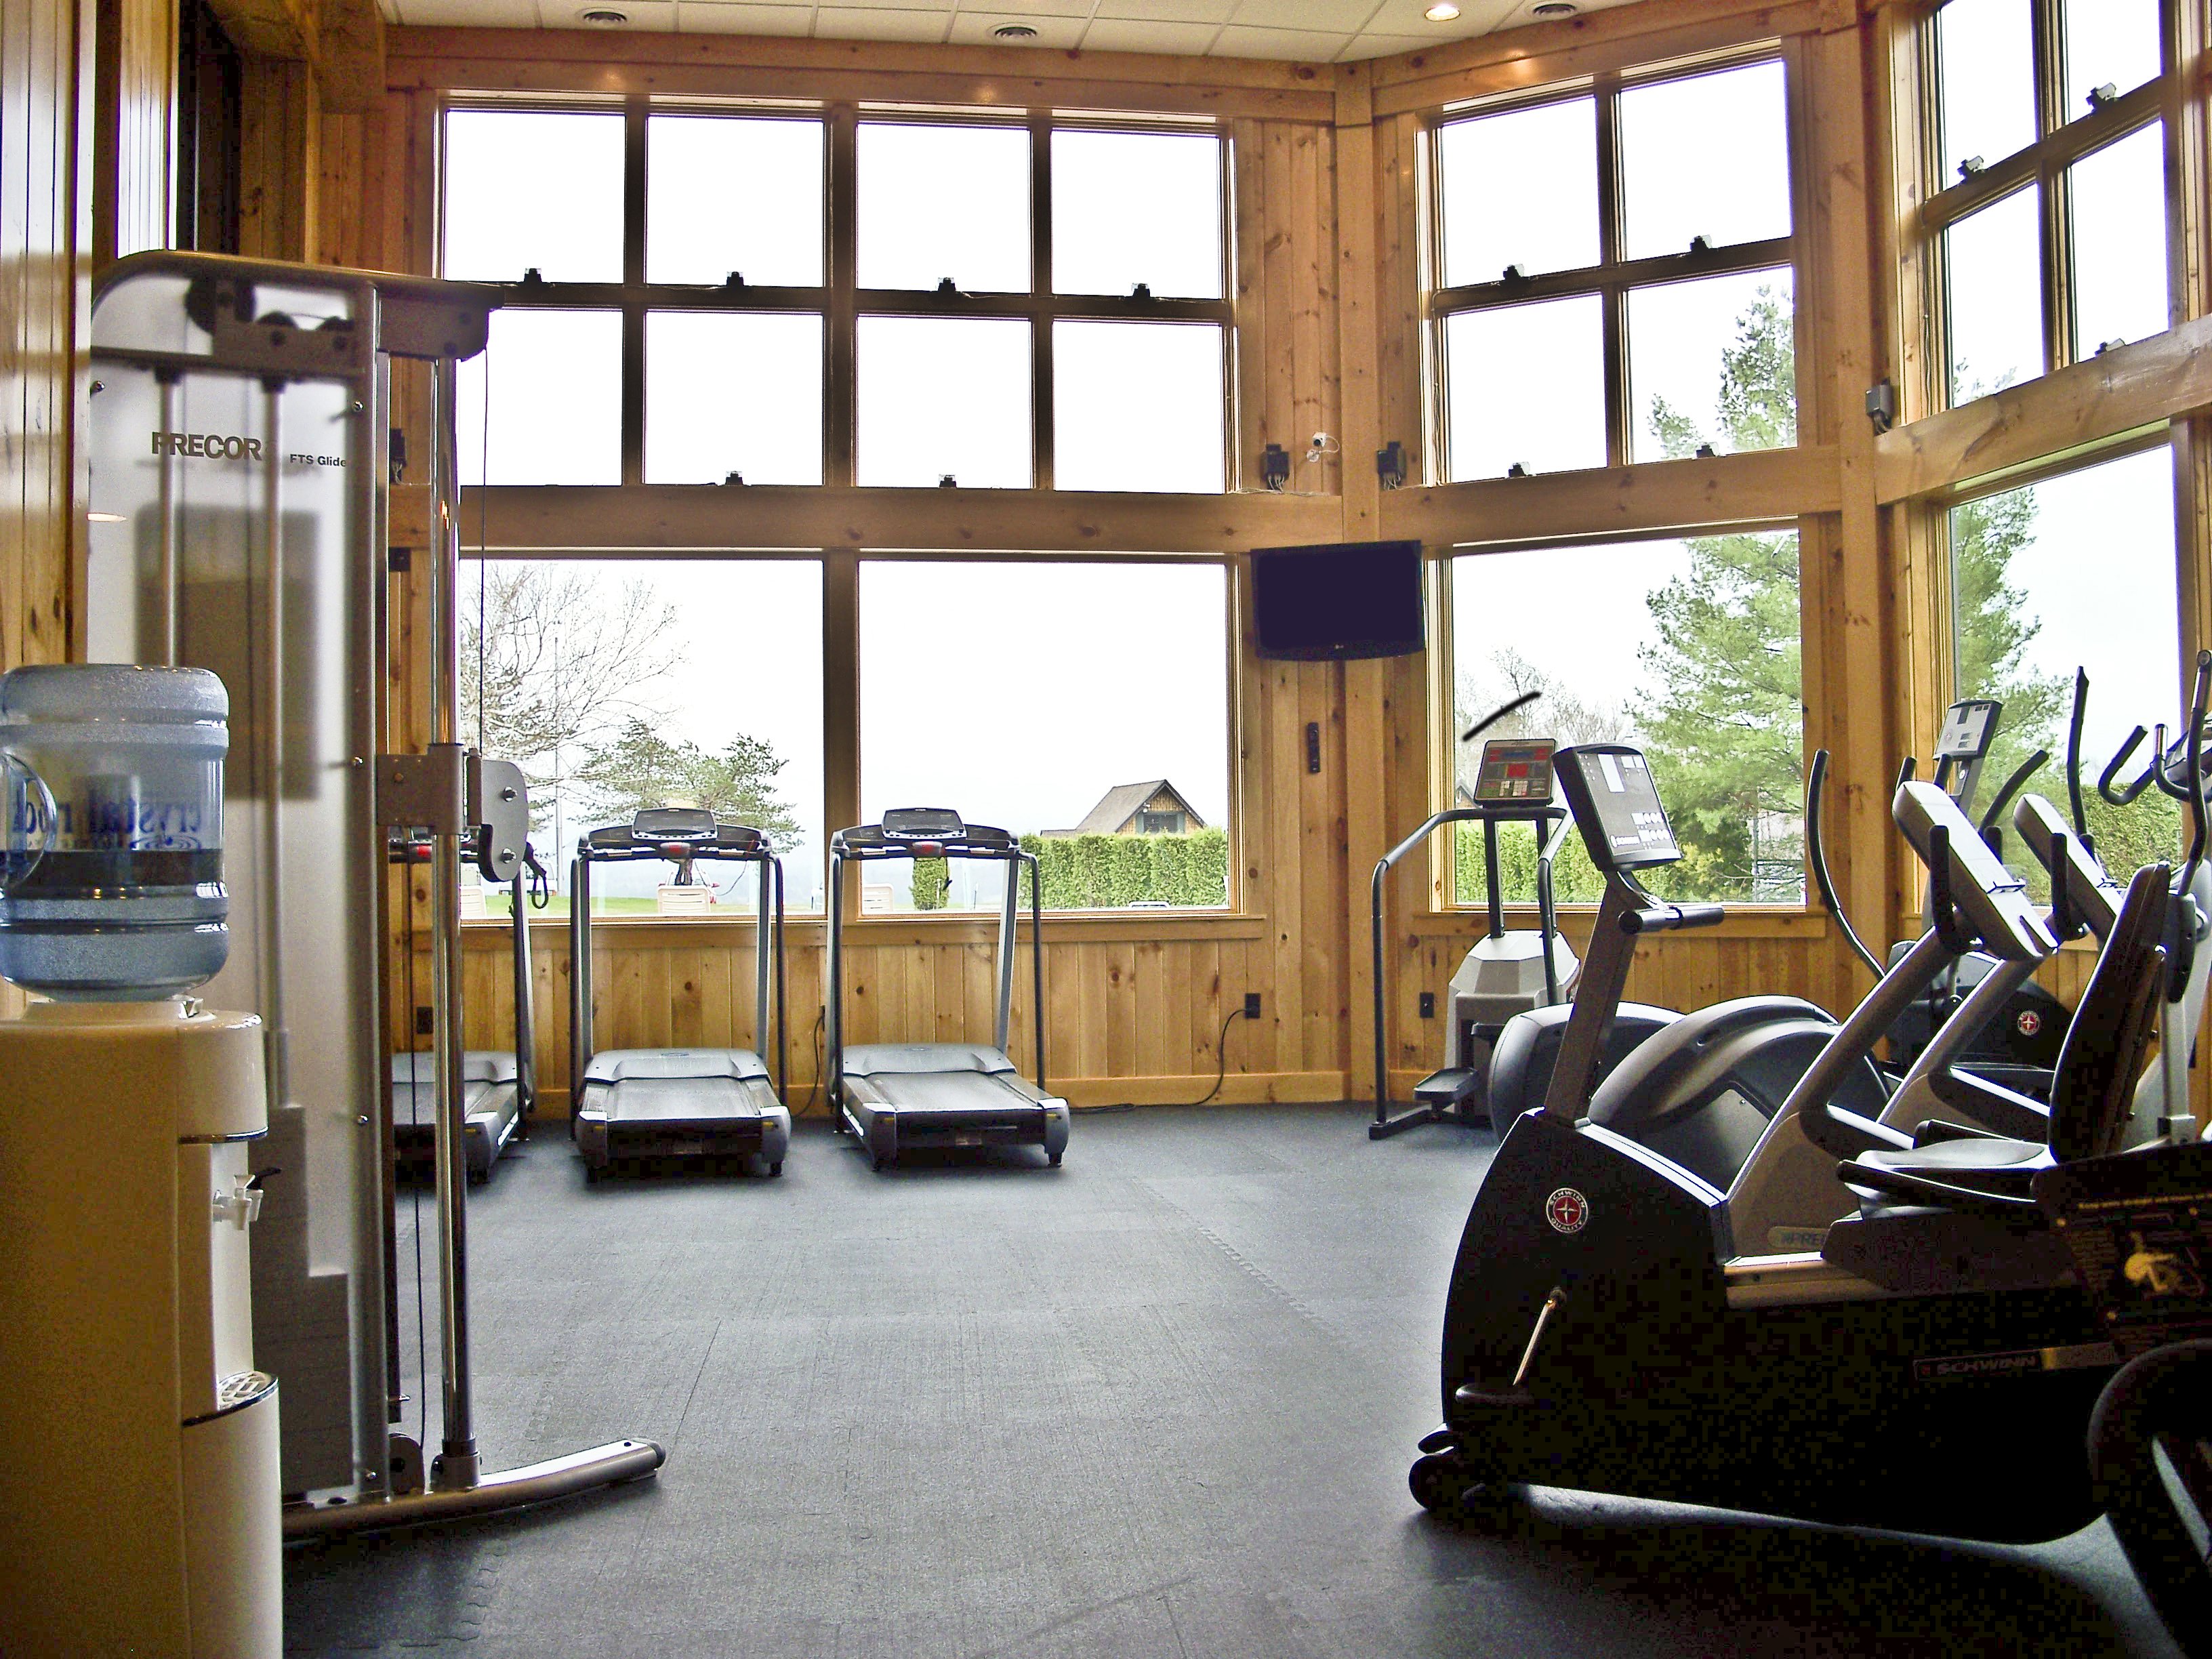 Keep up with your daily routine in our fitness center